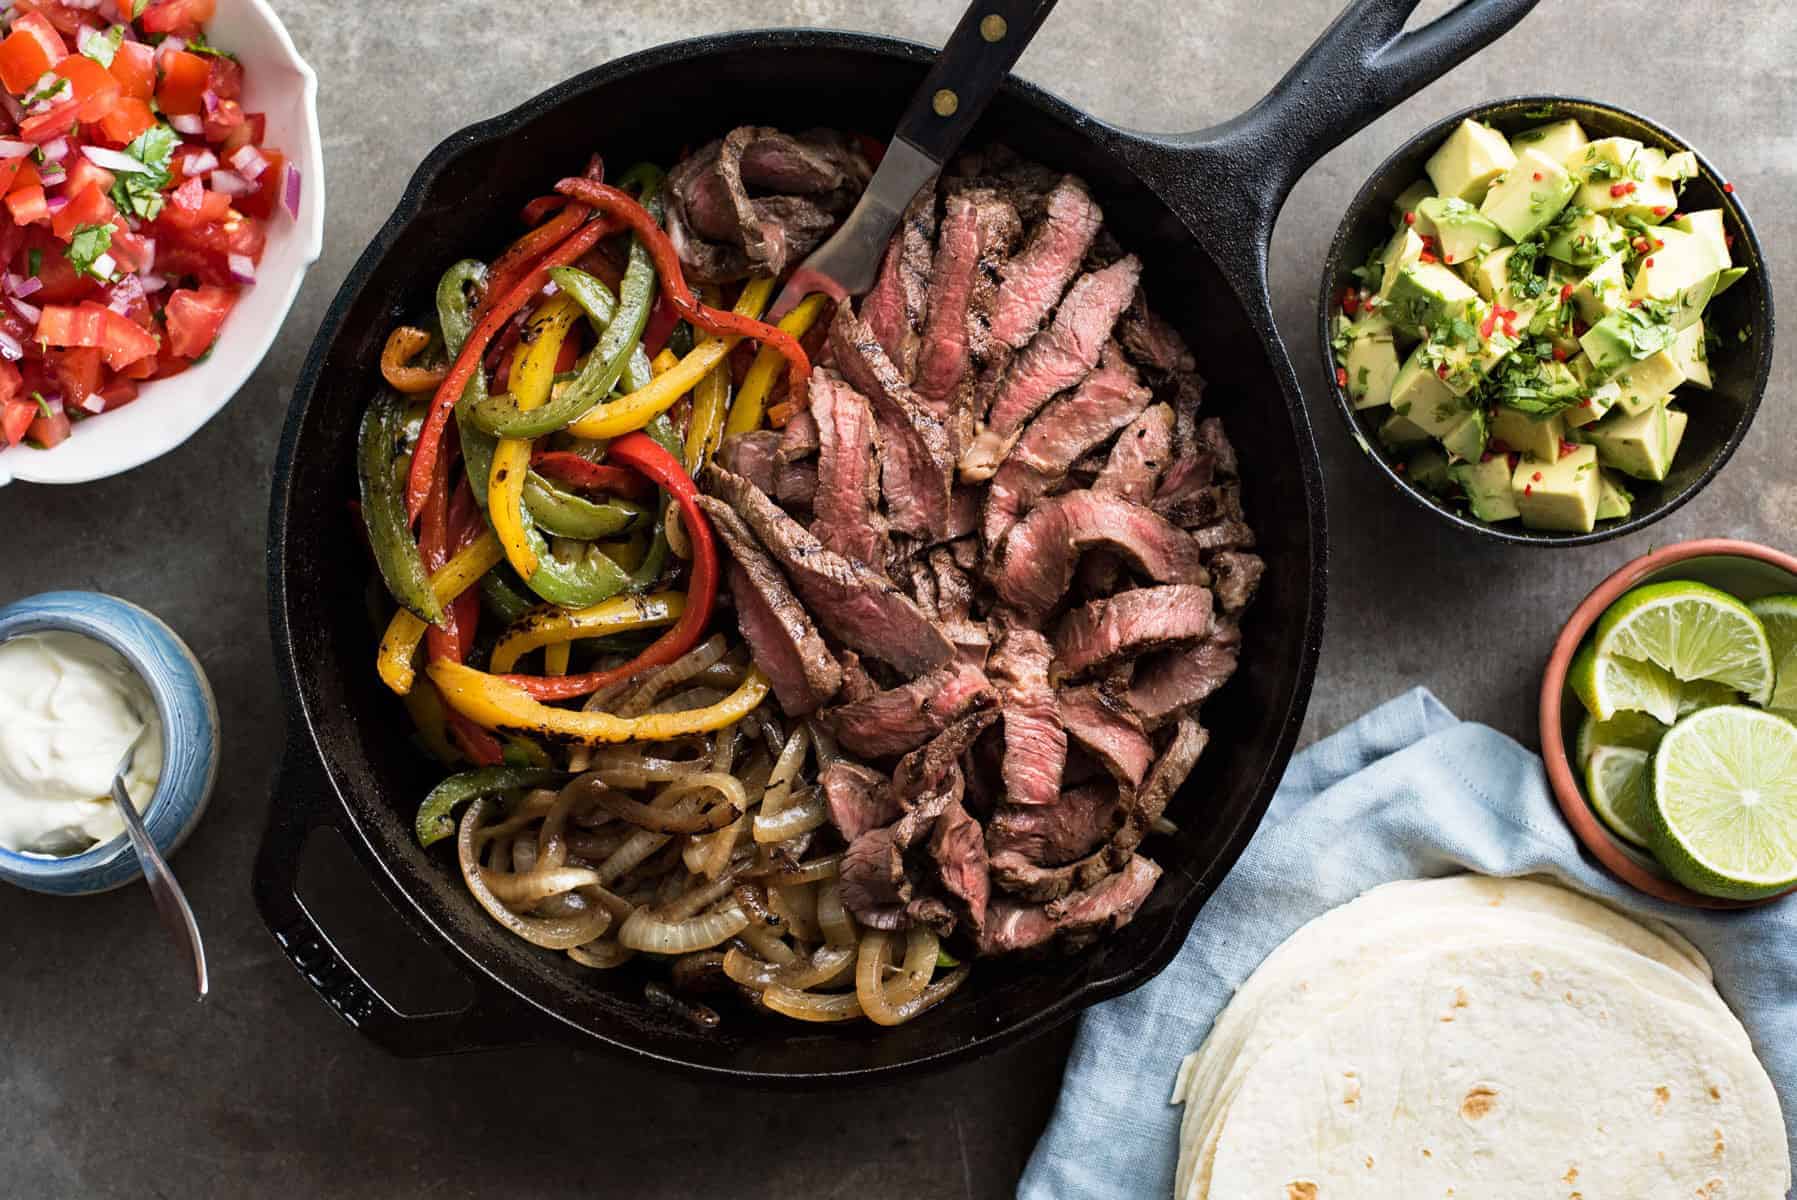 Beef Fajitas - Made extra juicy and extra tasty with a wicked marinade!